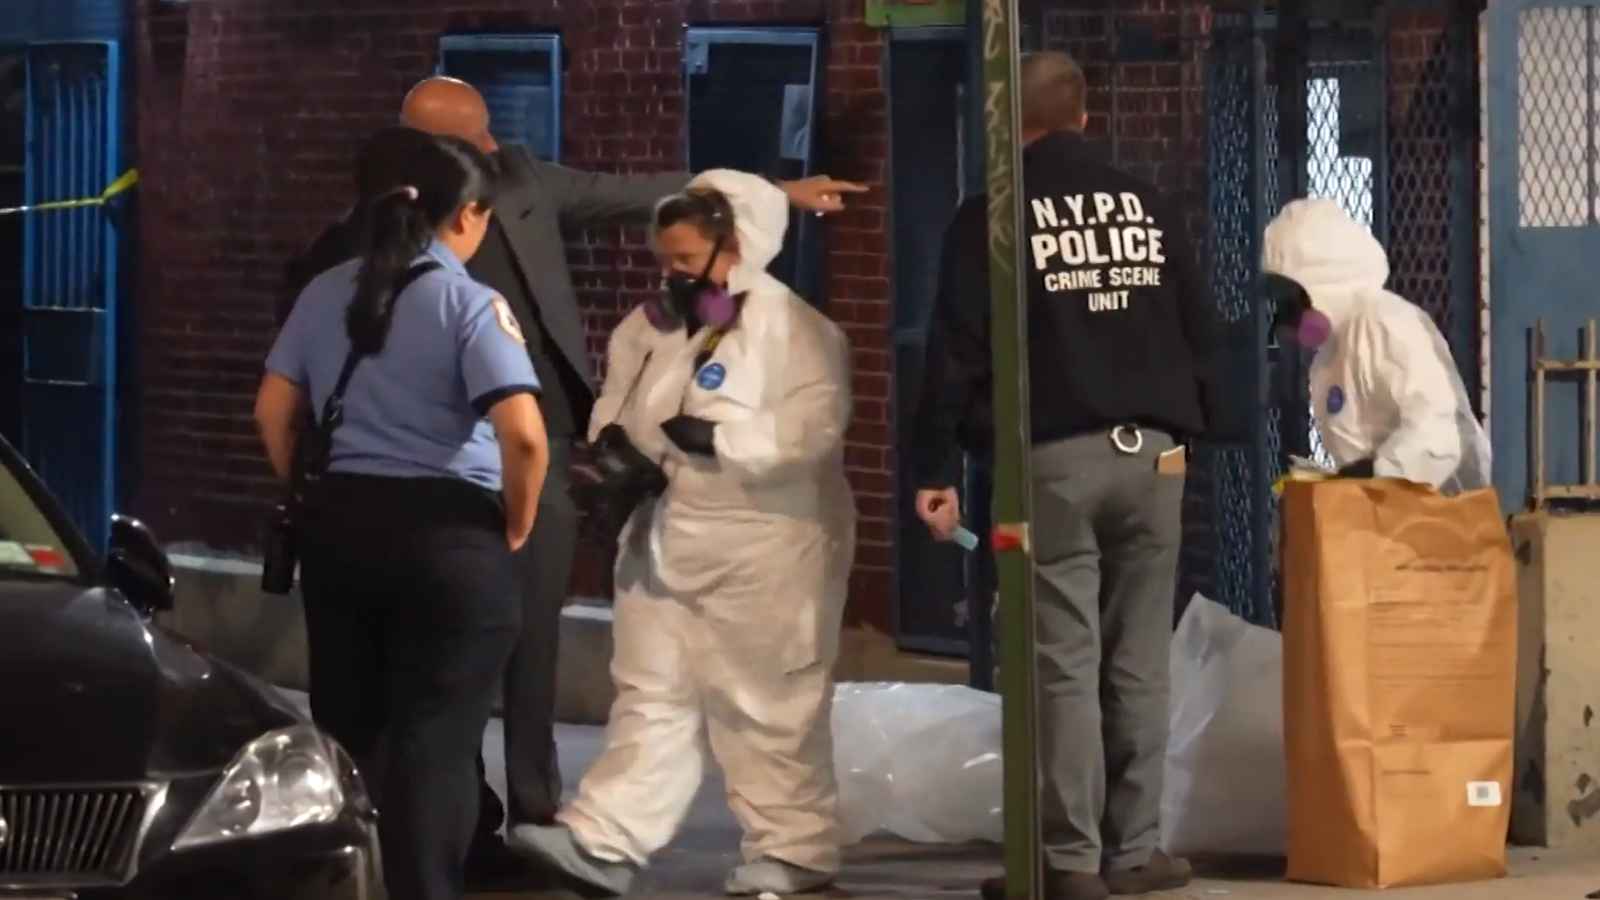 One-year-old died of apparent fentanyl overdose in New York City nursery